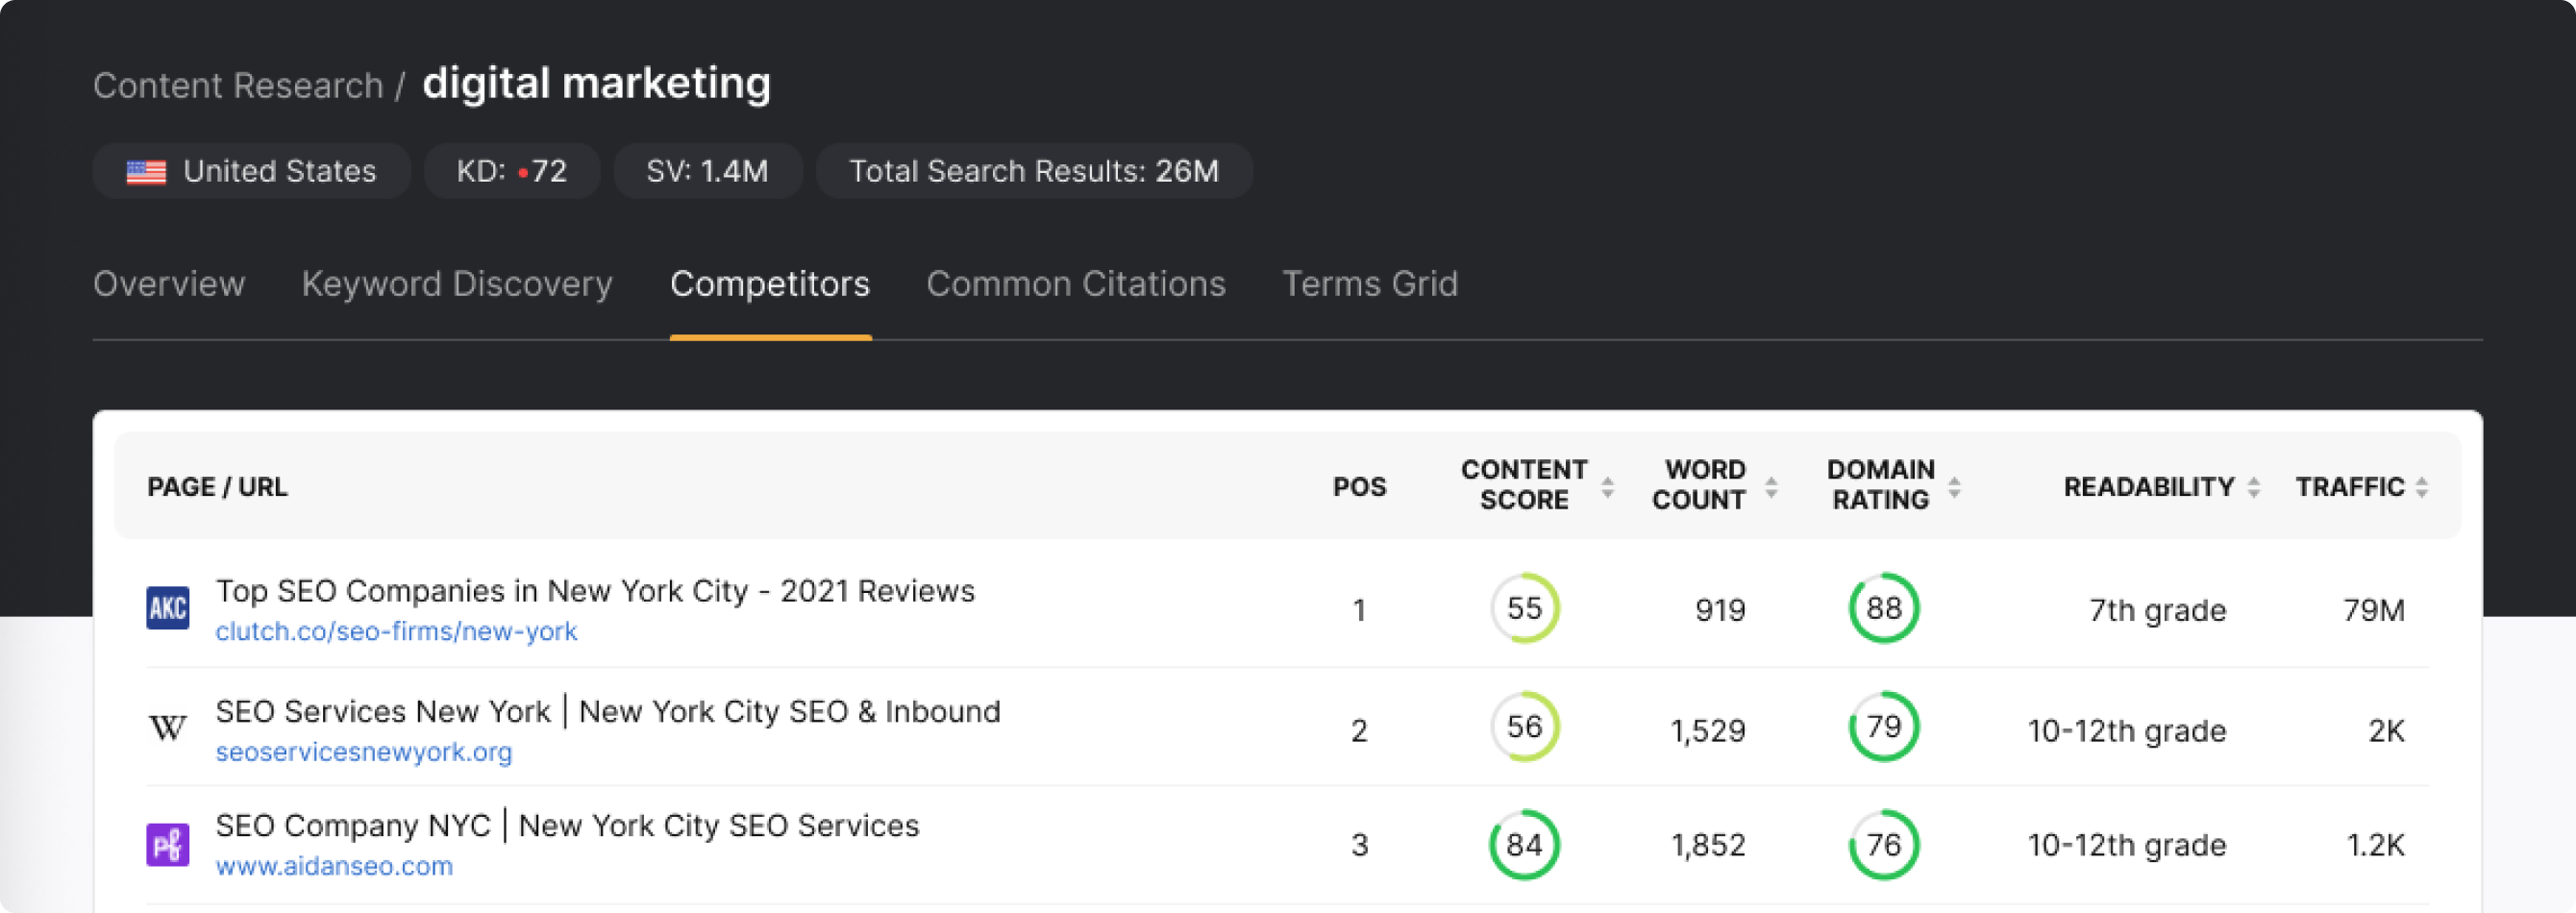 A screenshot of a digital marketing dashboard with SEO and Content Assistant features.